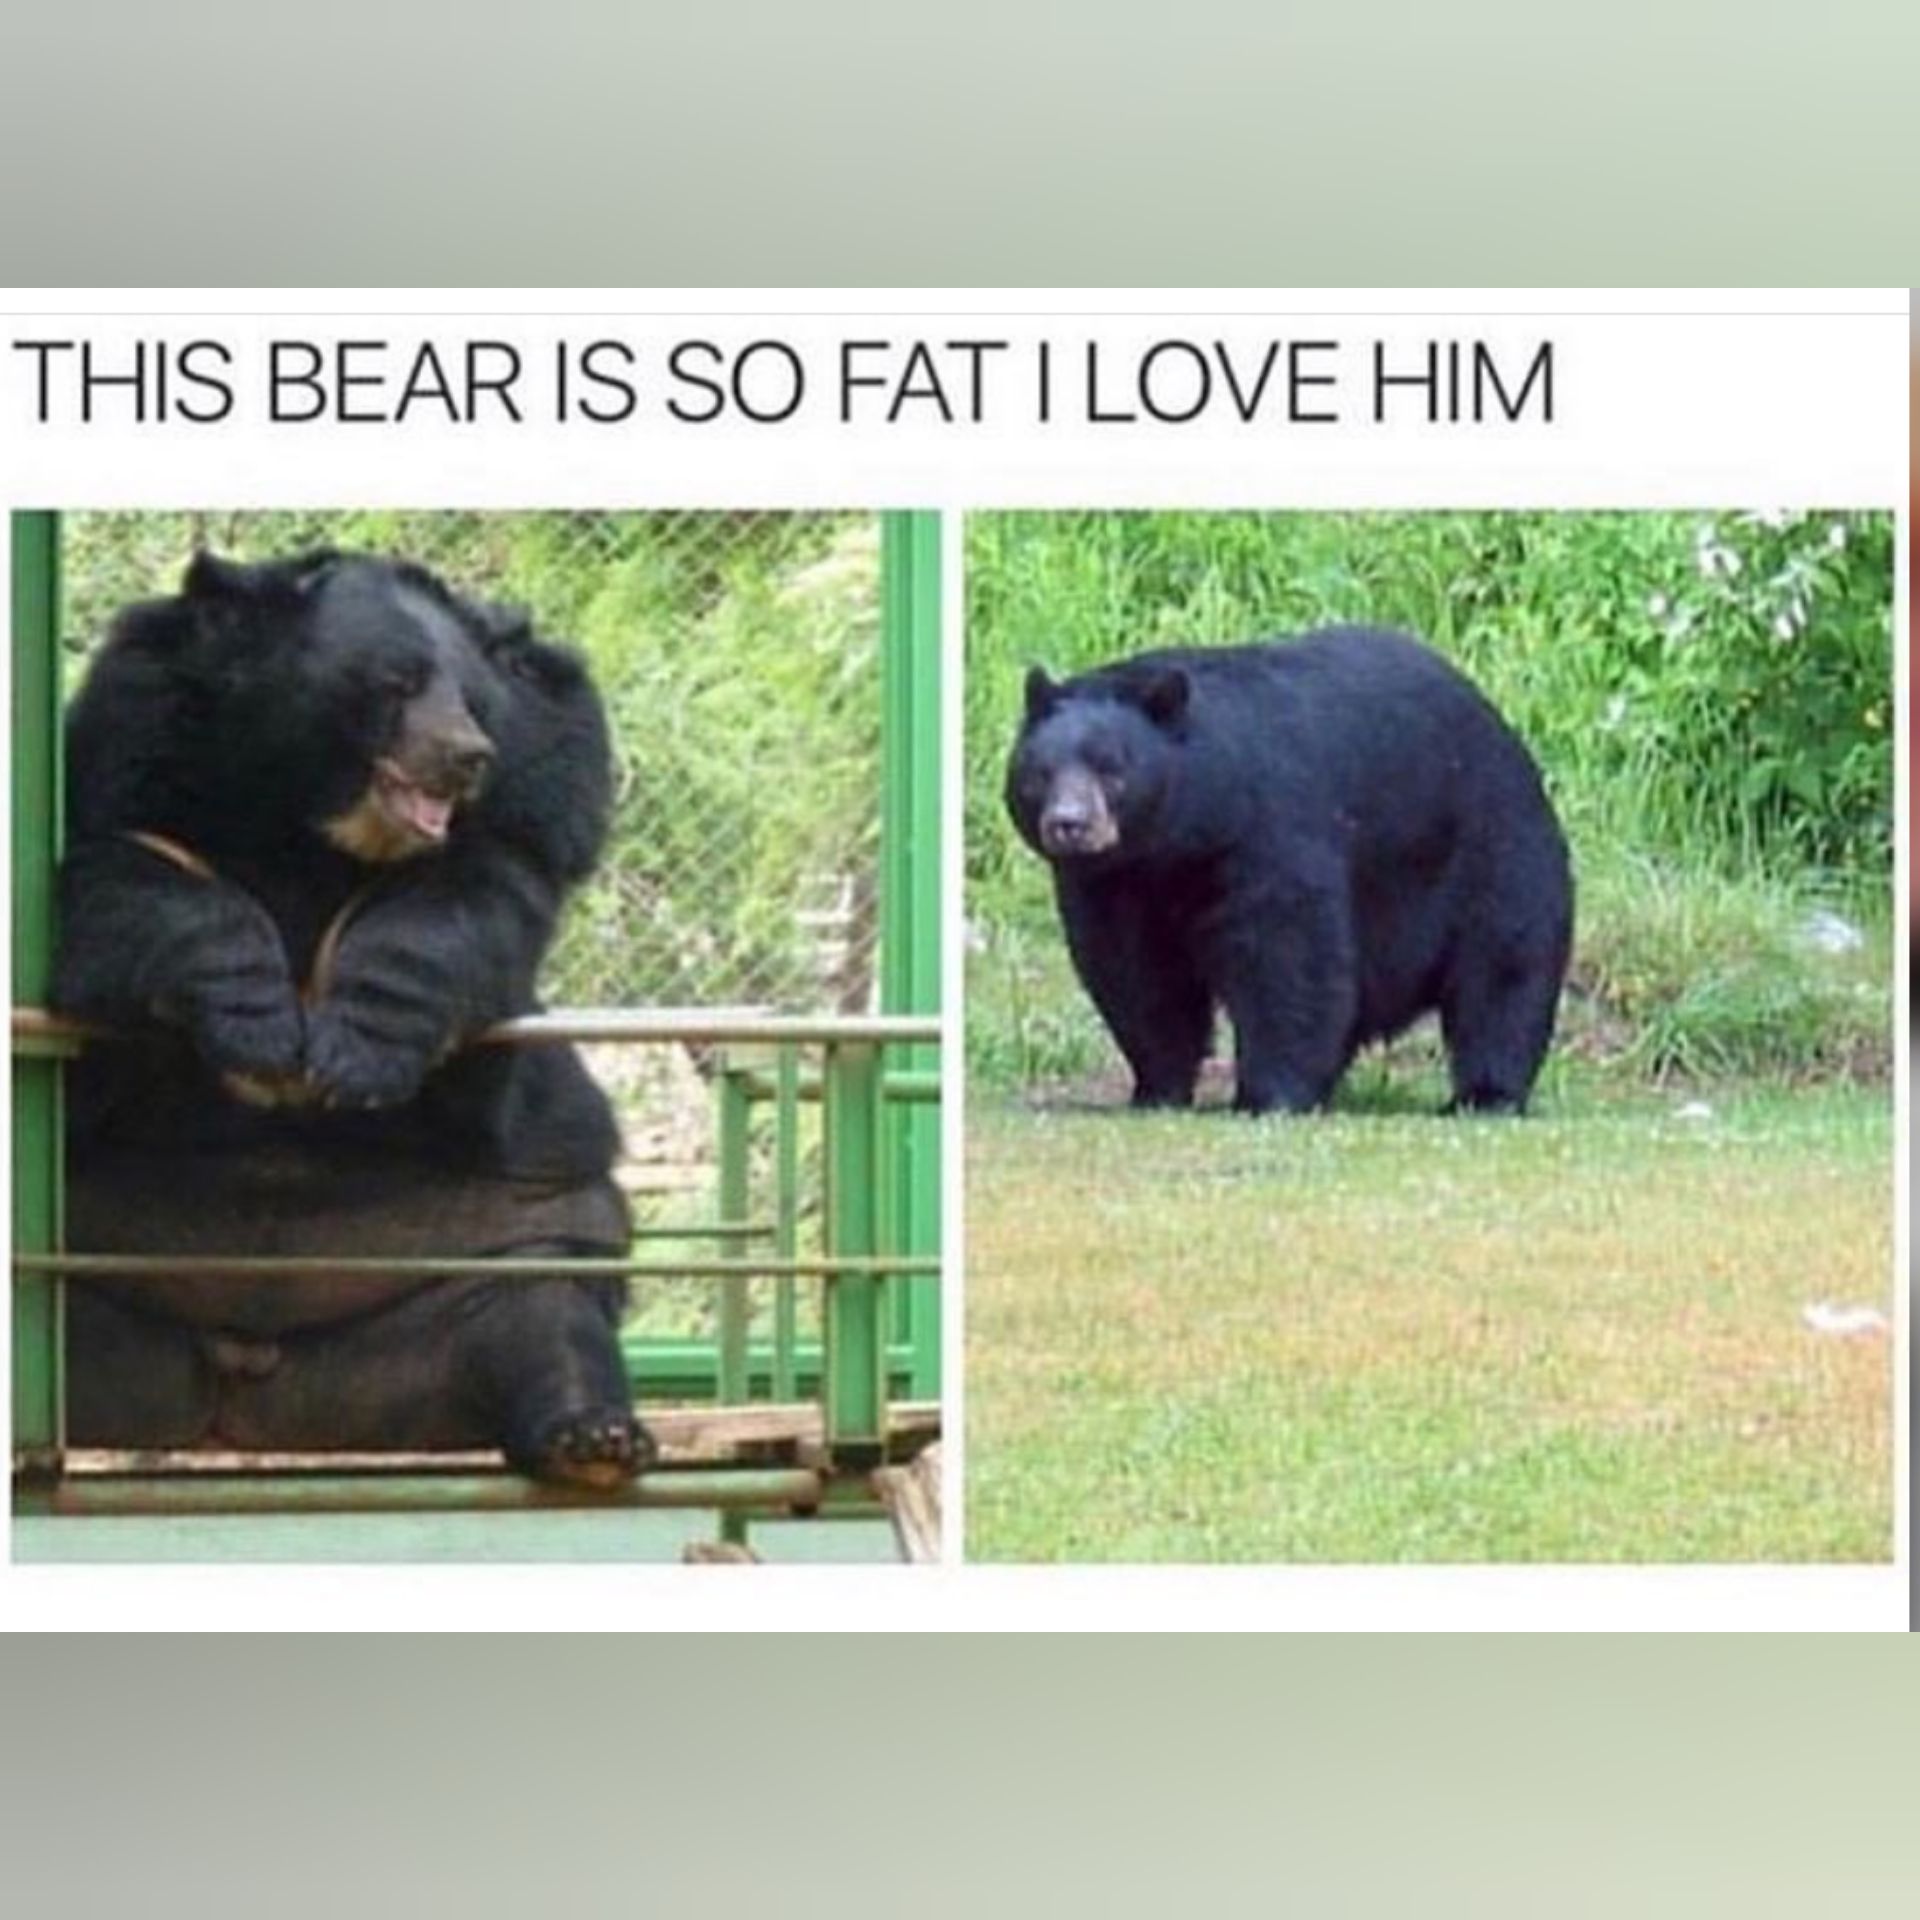 Can you relate to the bear?